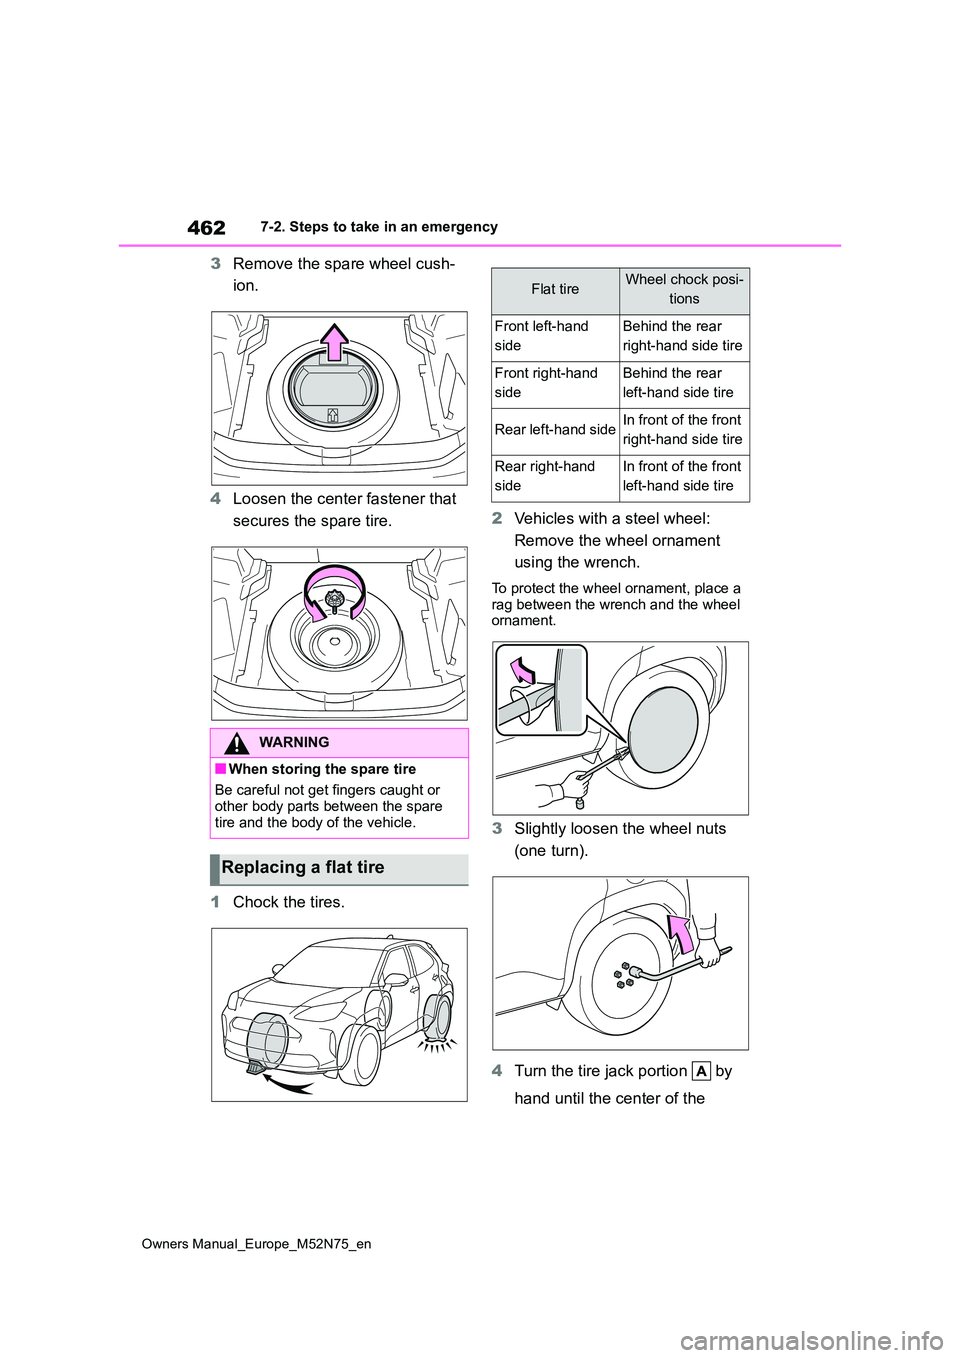 TOYOTA YARIS CROSS 2023 Service Manual 462
Owners Manual_Europe_M52N75_en
7-2. Steps to take in an emergency
3Remove the spare wheel cush- 
ion. 
4 Loosen the center fastener that  
secures the spare tire. 
1 Chock the tires. 
2 Vehicles w